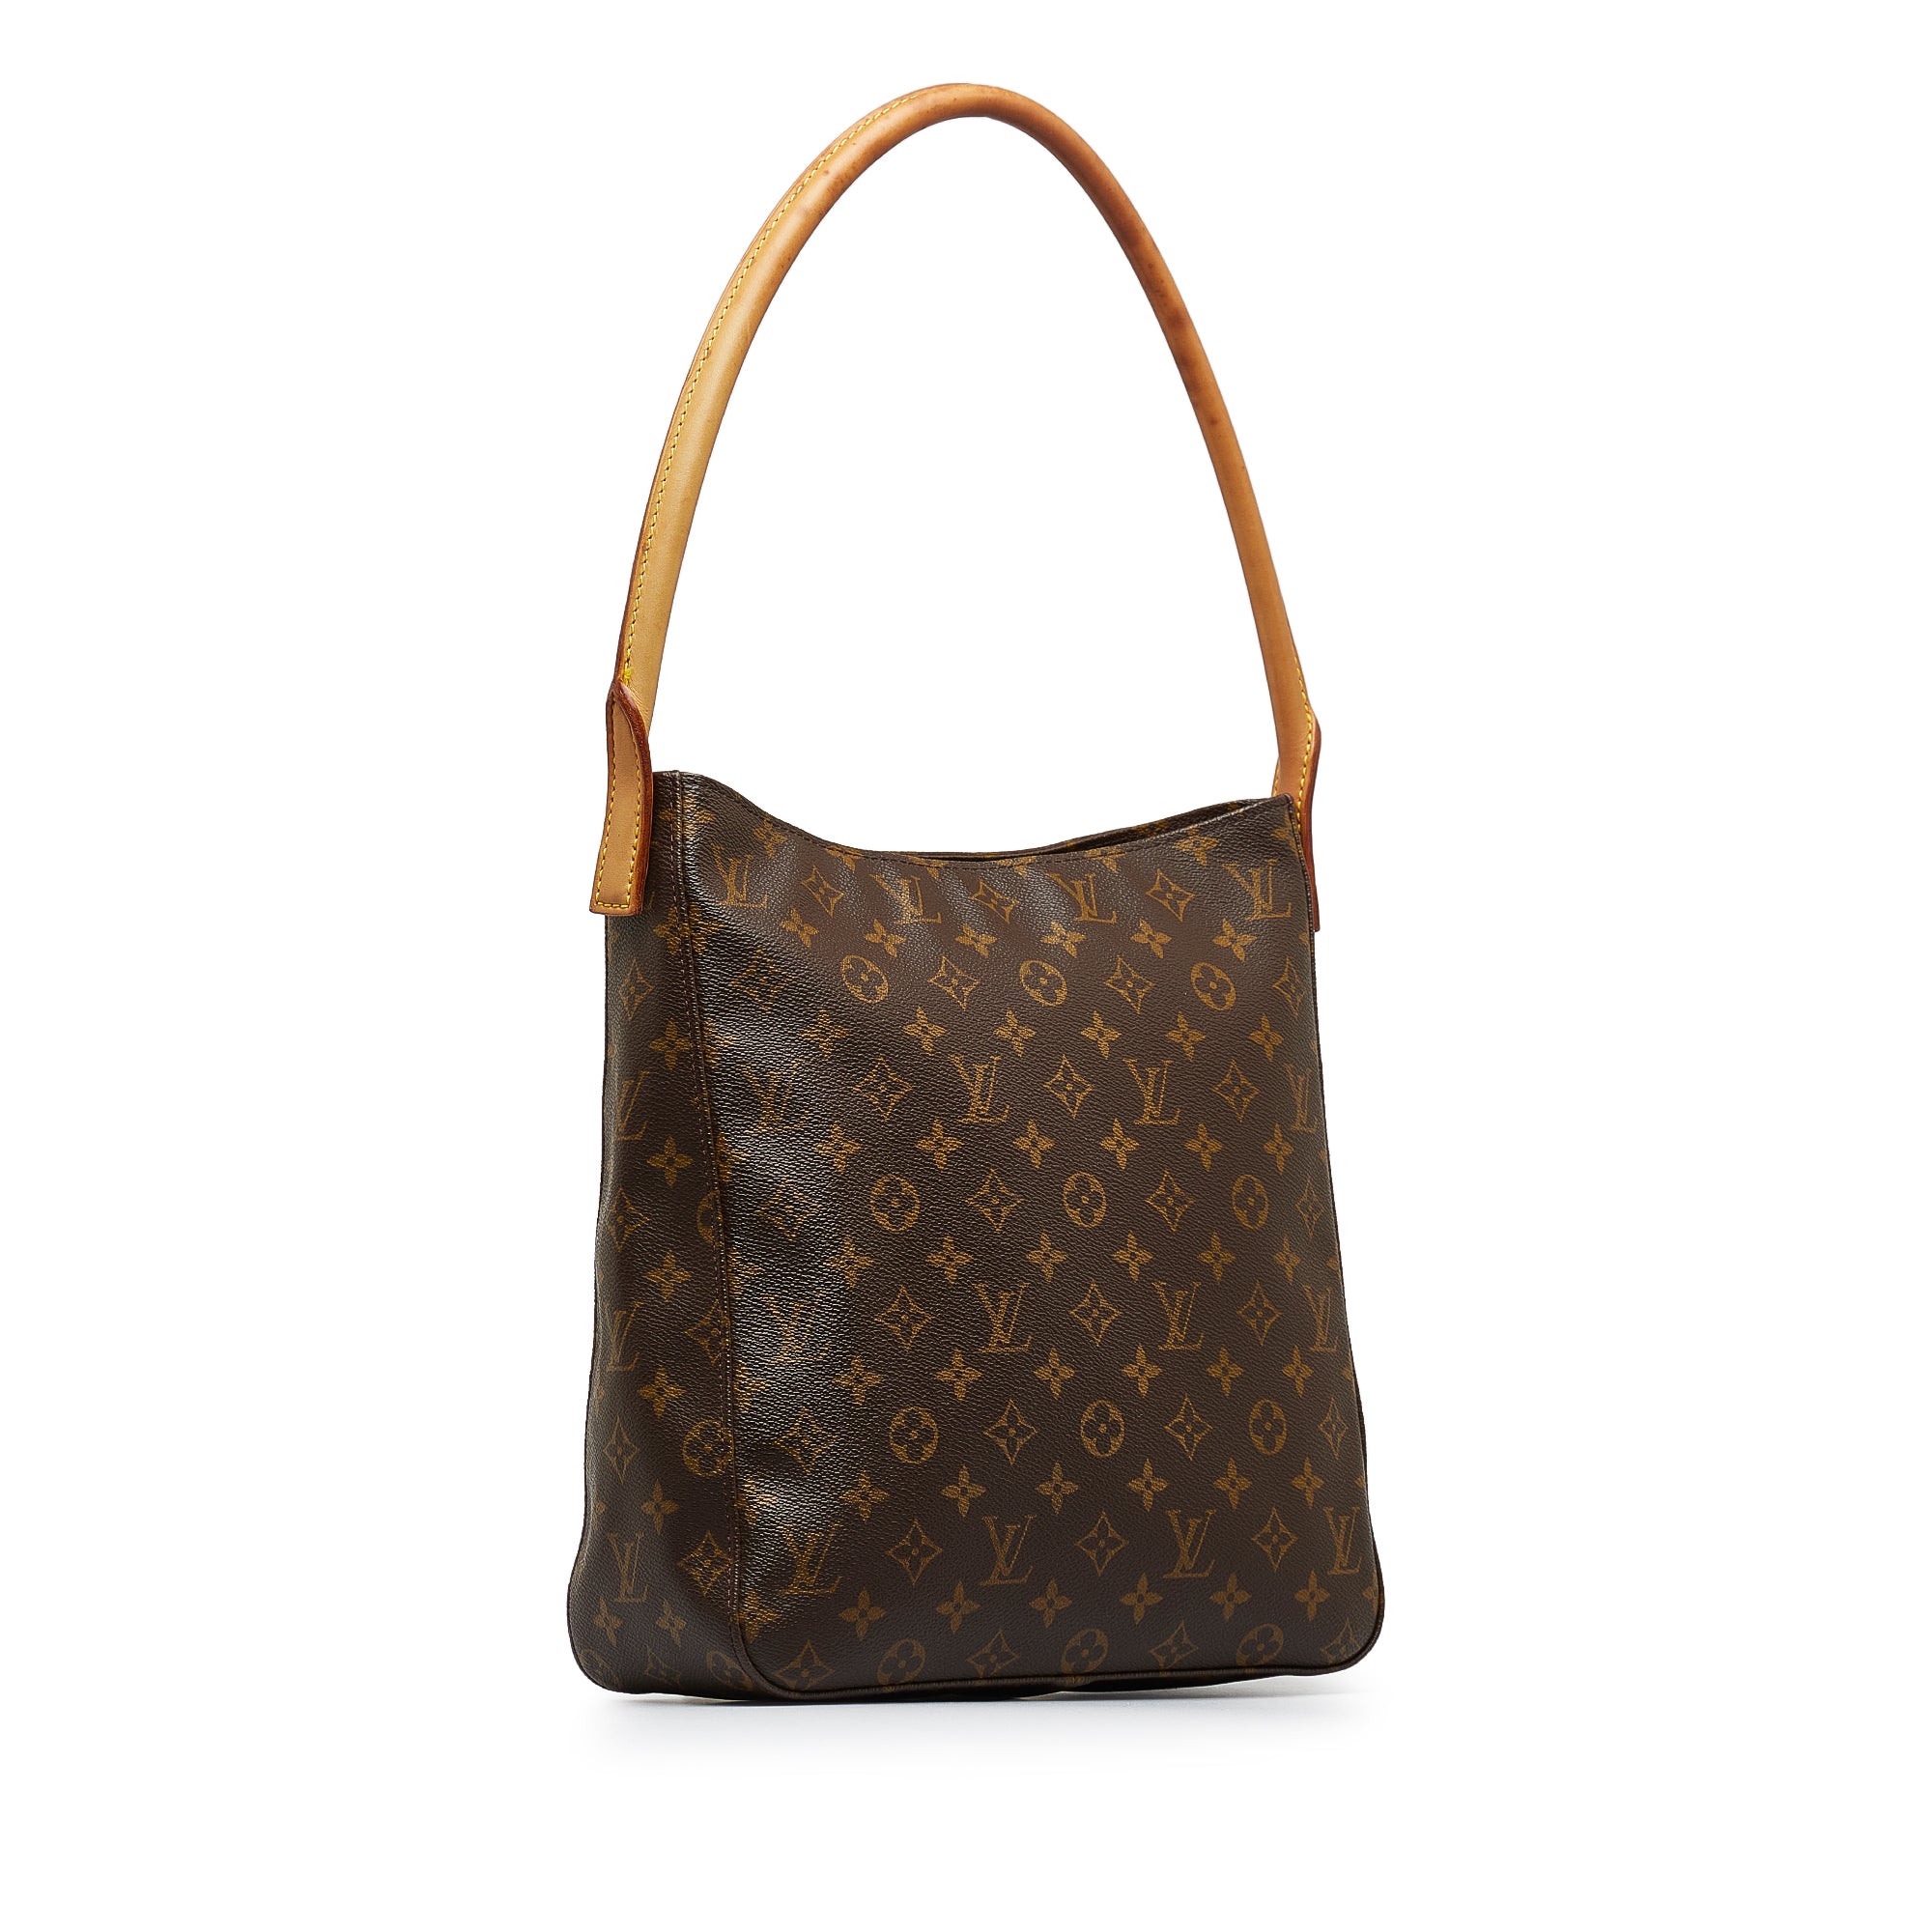 Louis Vuitton - Authenticated Blois Handbag - Leather Brown for Women, Very Good Condition